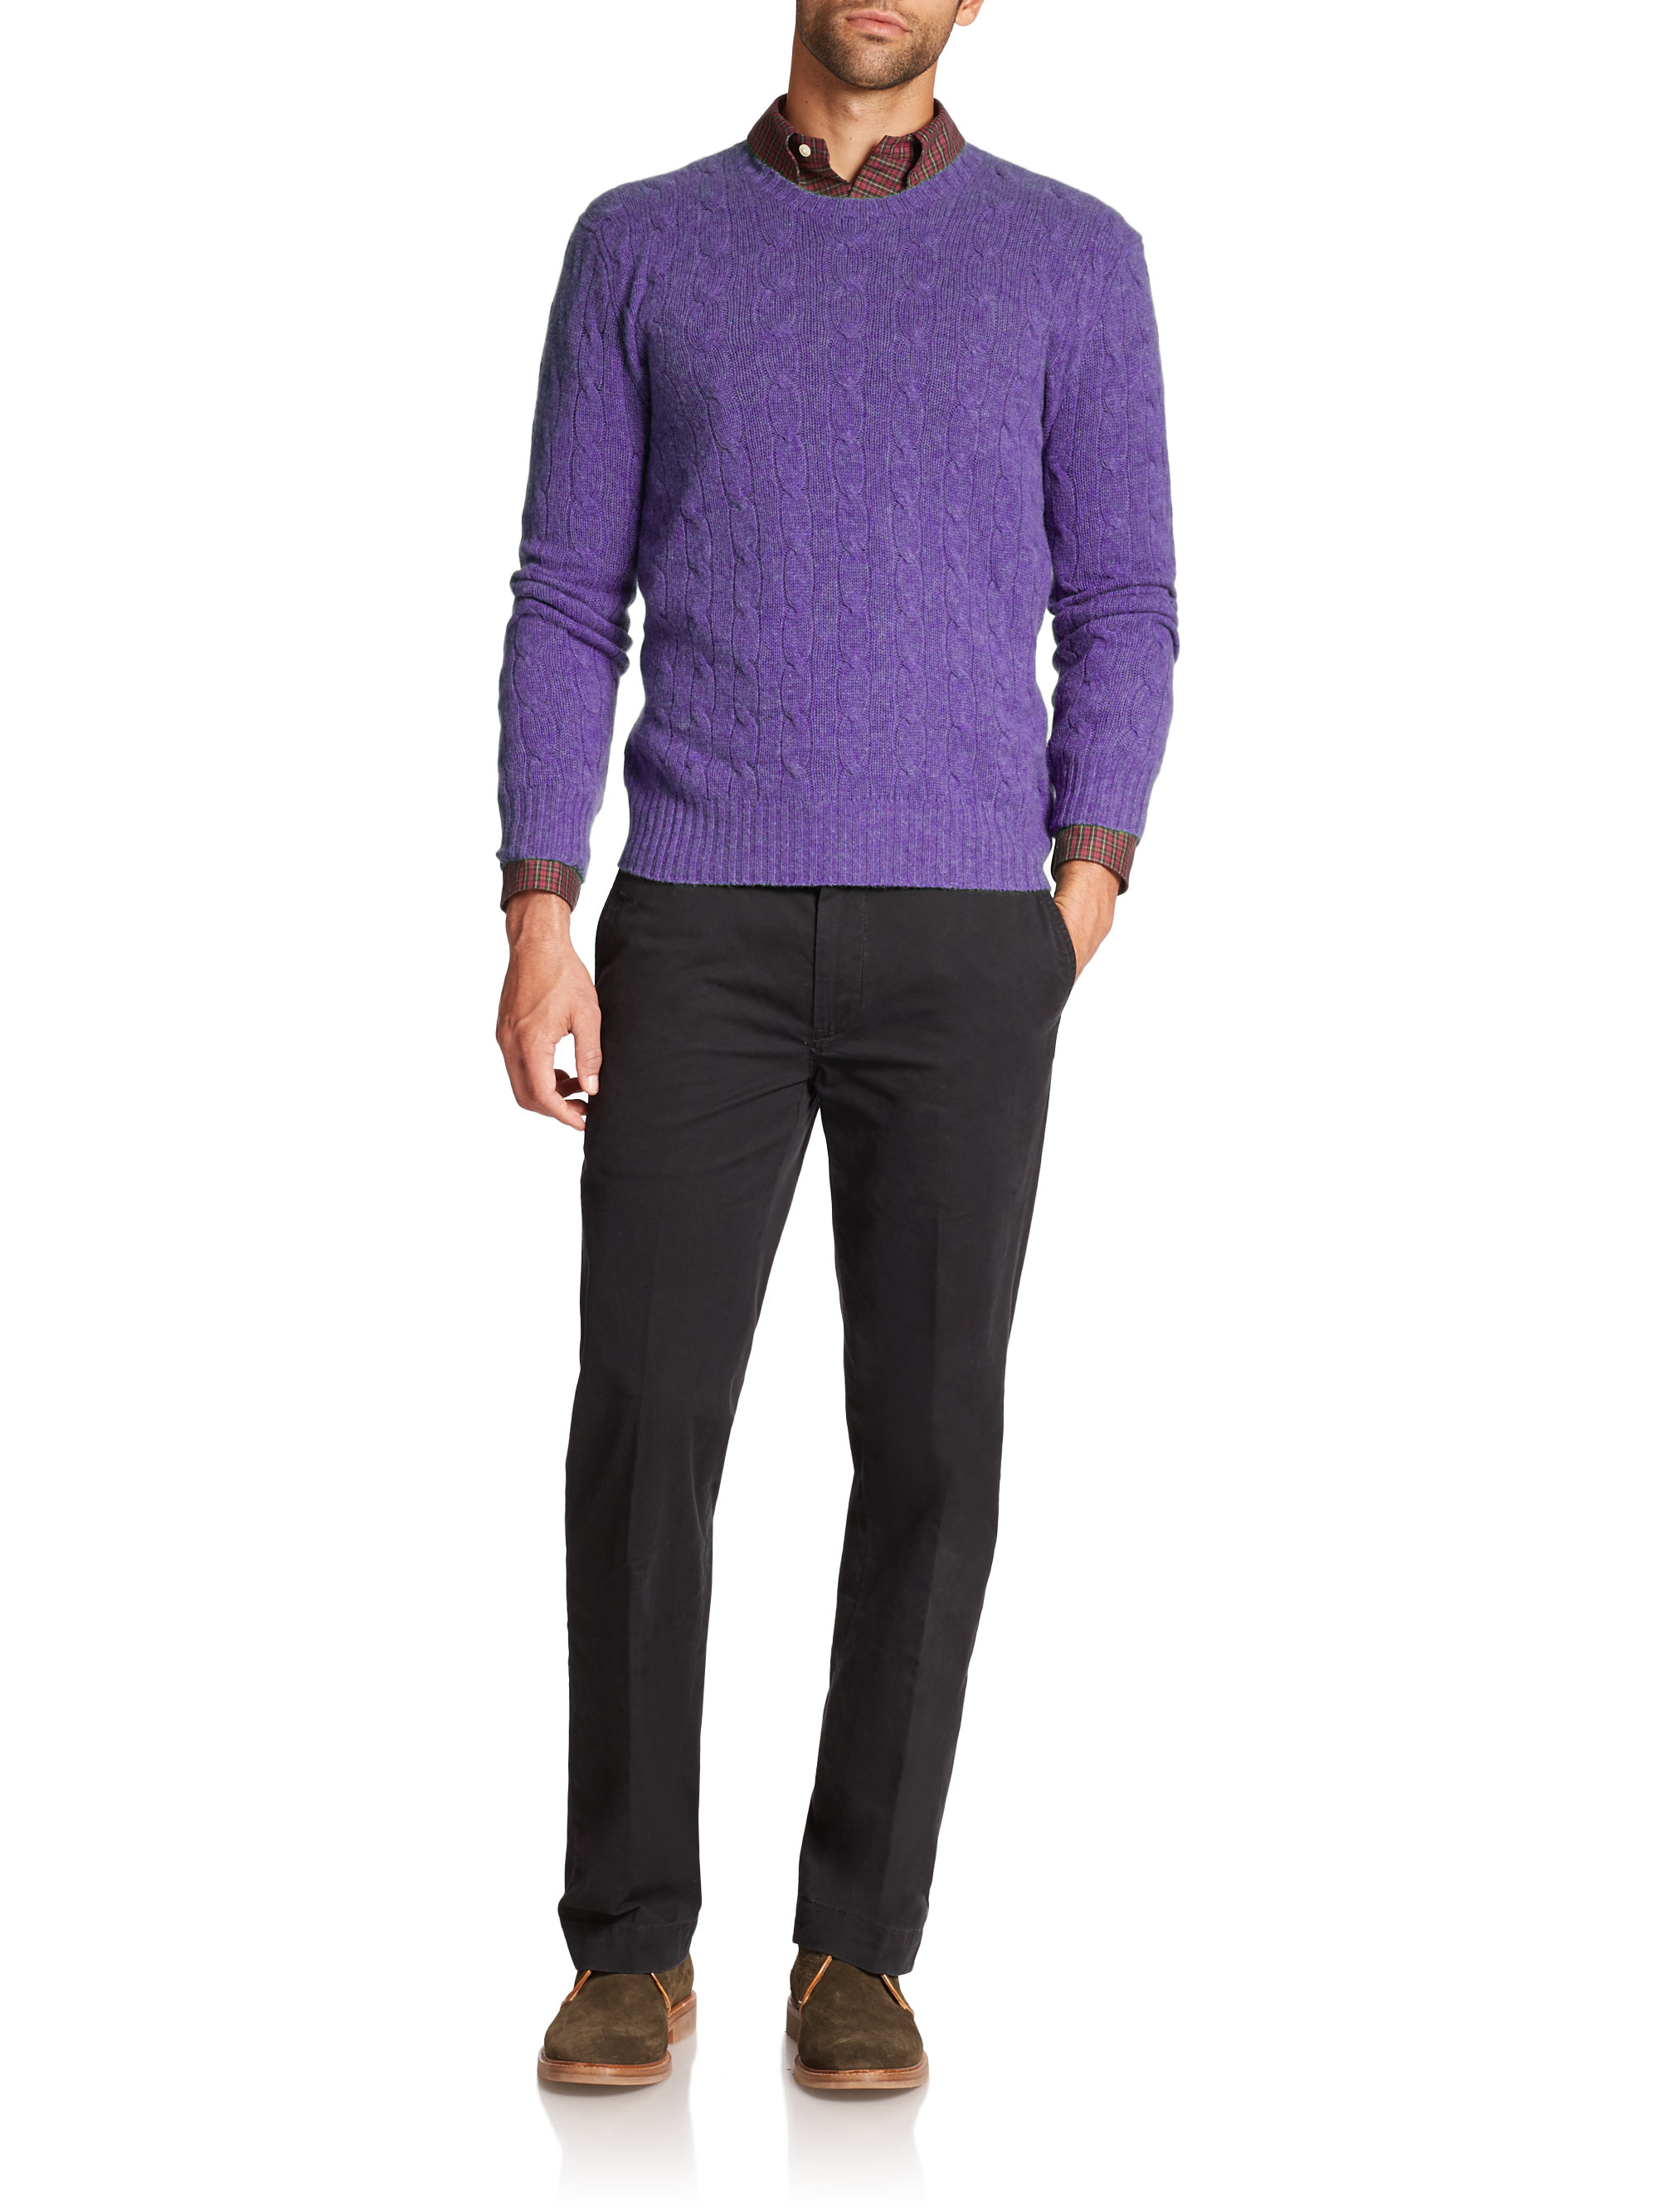 Polo ralph lauren Cable-knit Cashmere Sweater in Purple for Men | Lyst